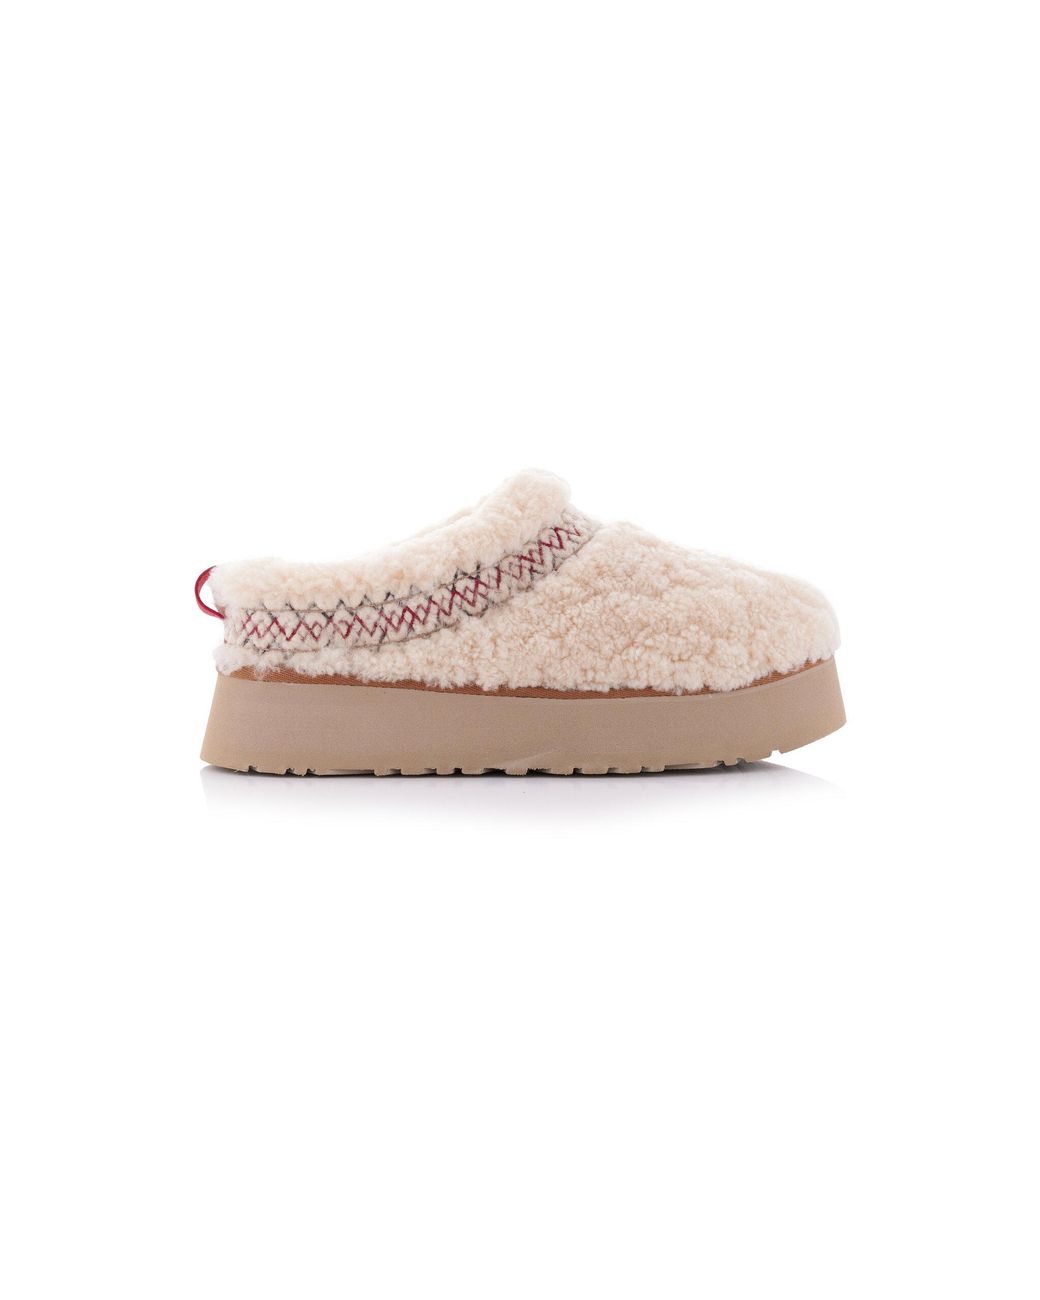 UGG Tazz Shearling Platform Slippers in Pink | Lyst